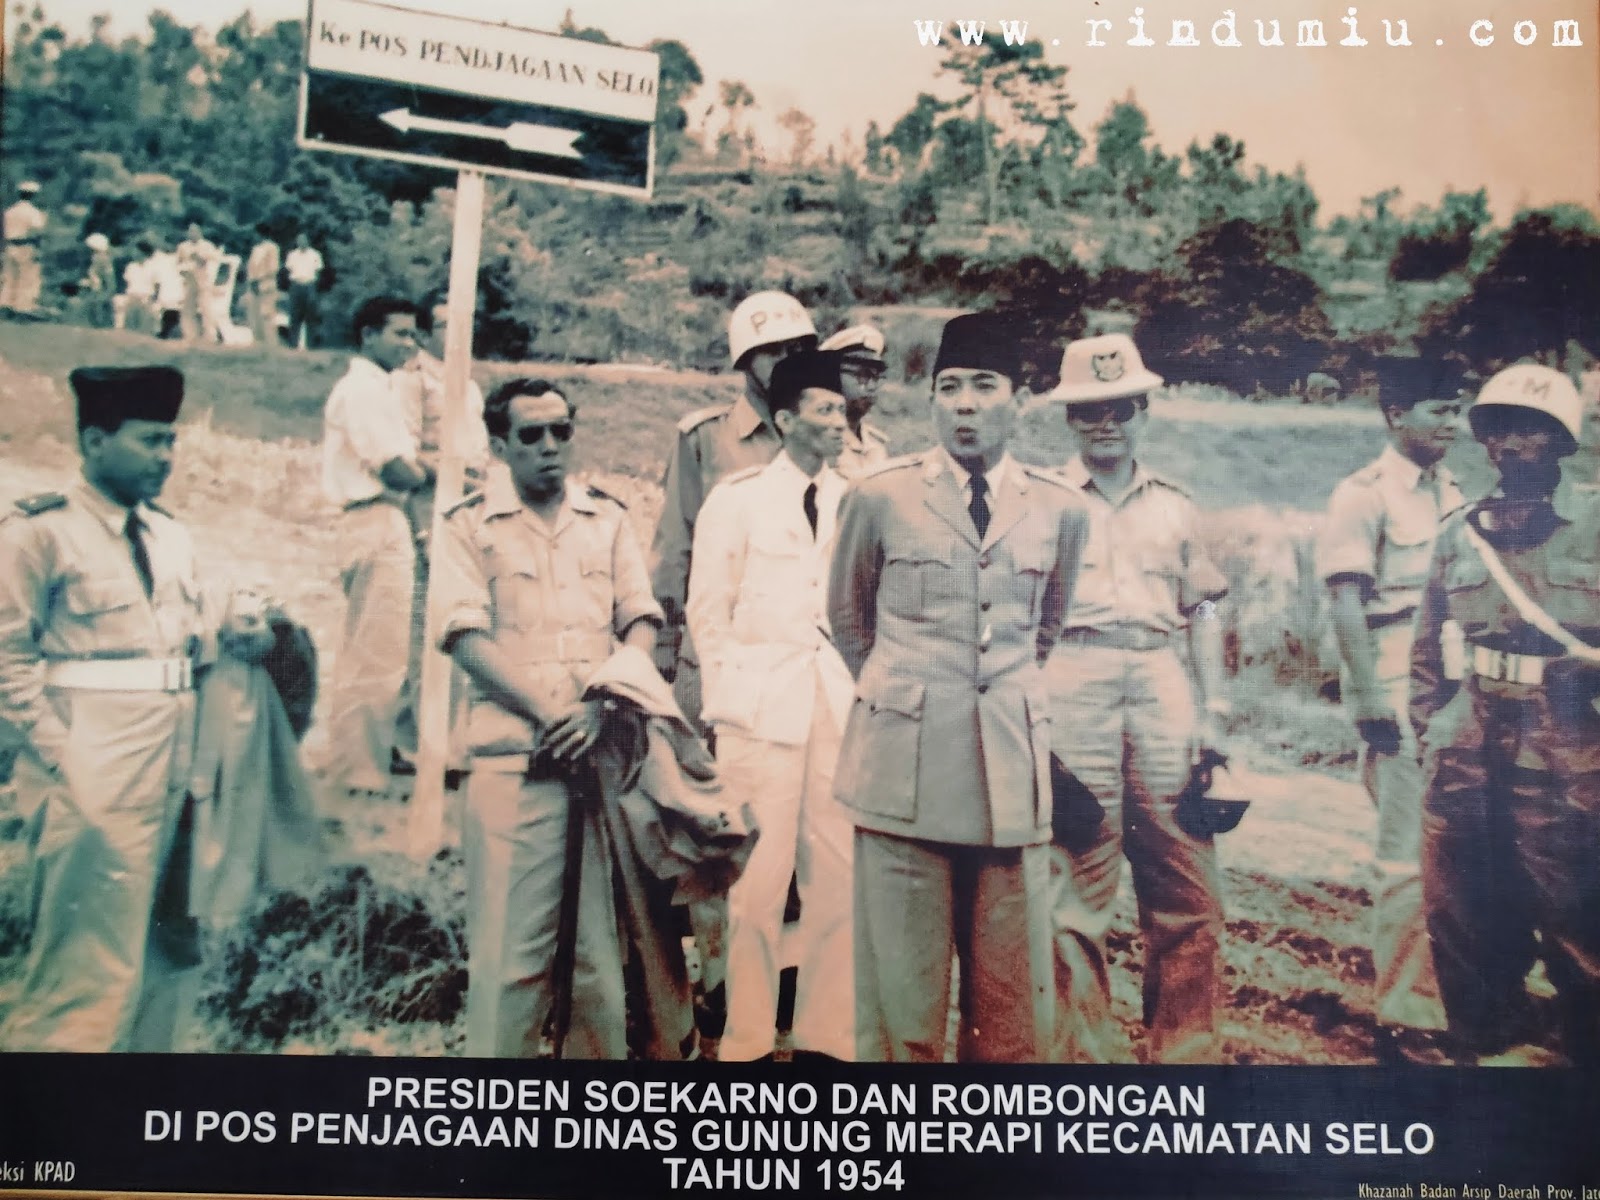 An old photo of the first president of Indonesia, Mr. Soekarno, visited Boyolali in 1954.